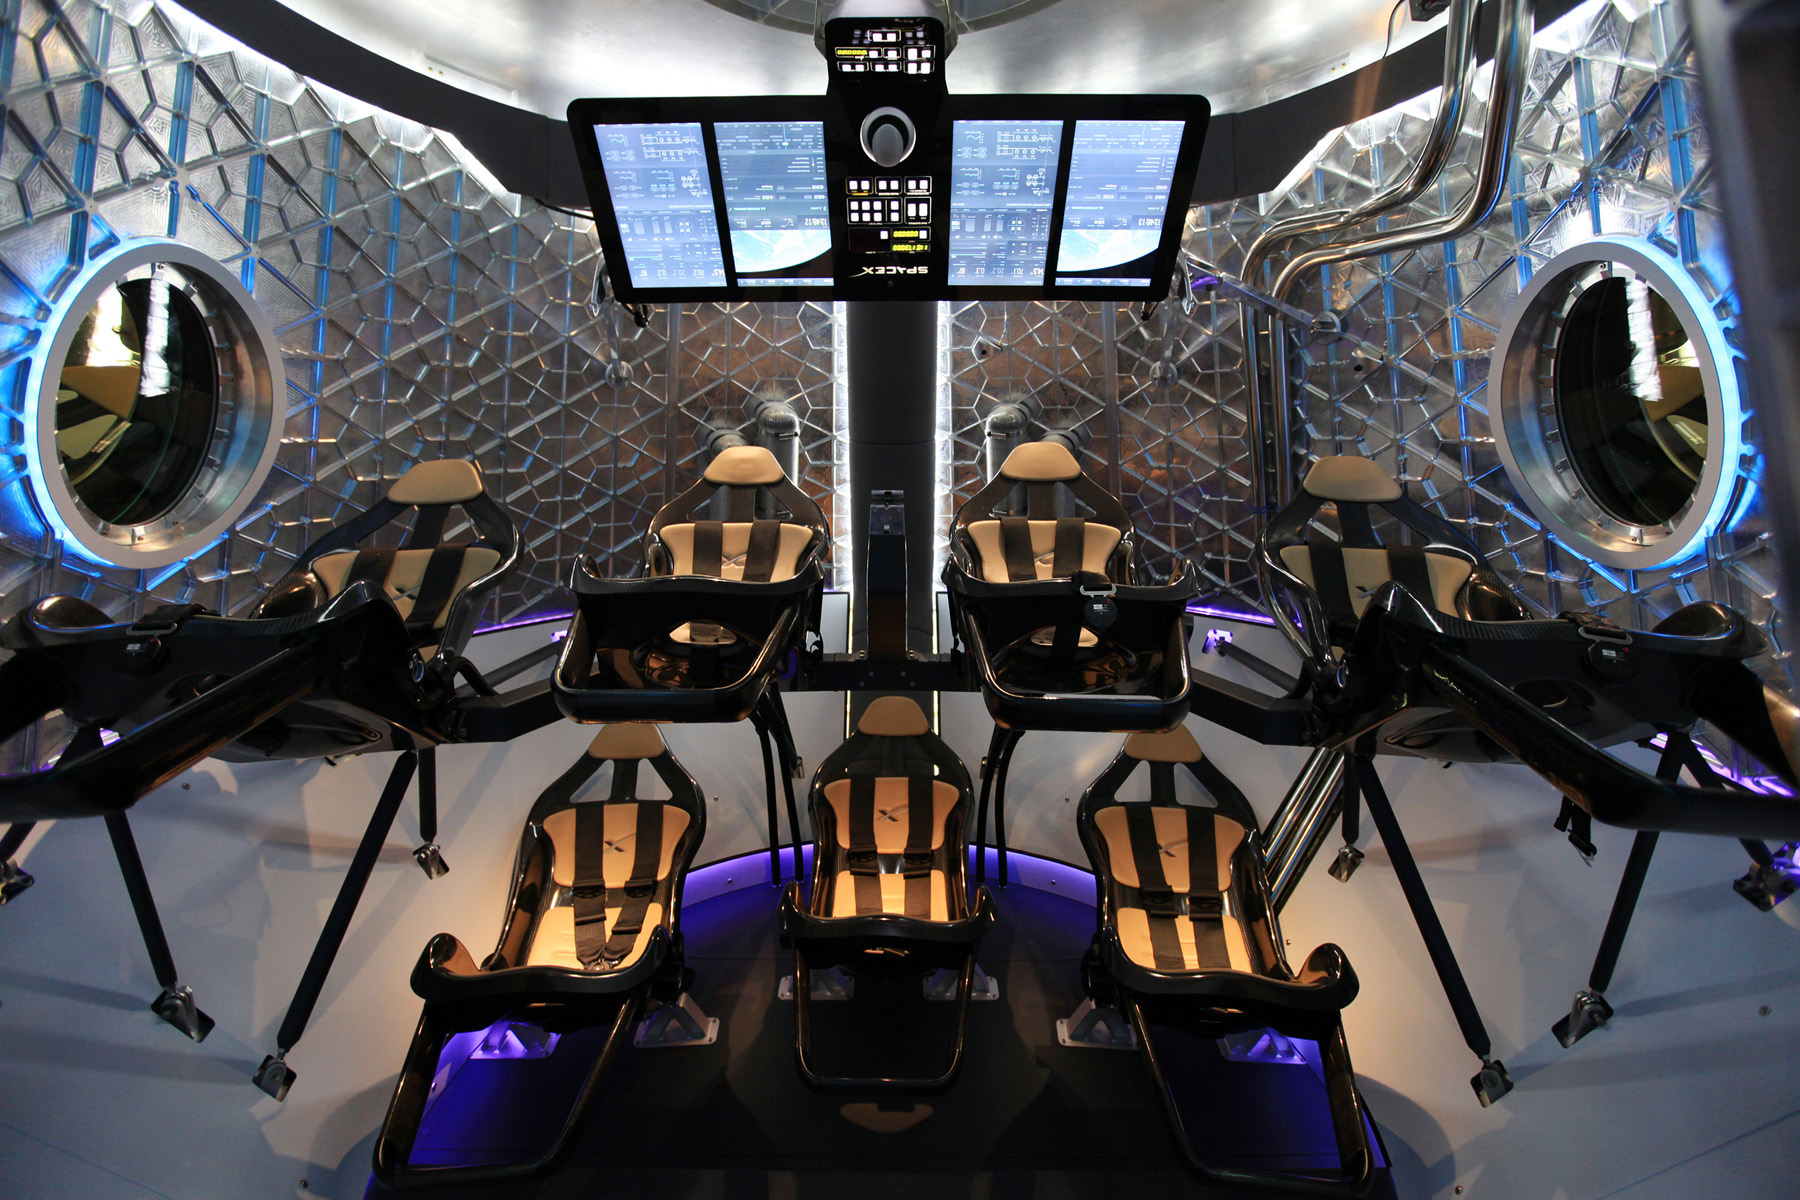 Enter the Dragon: First Look Inside SpaceX’s New Crew Transporter to ...